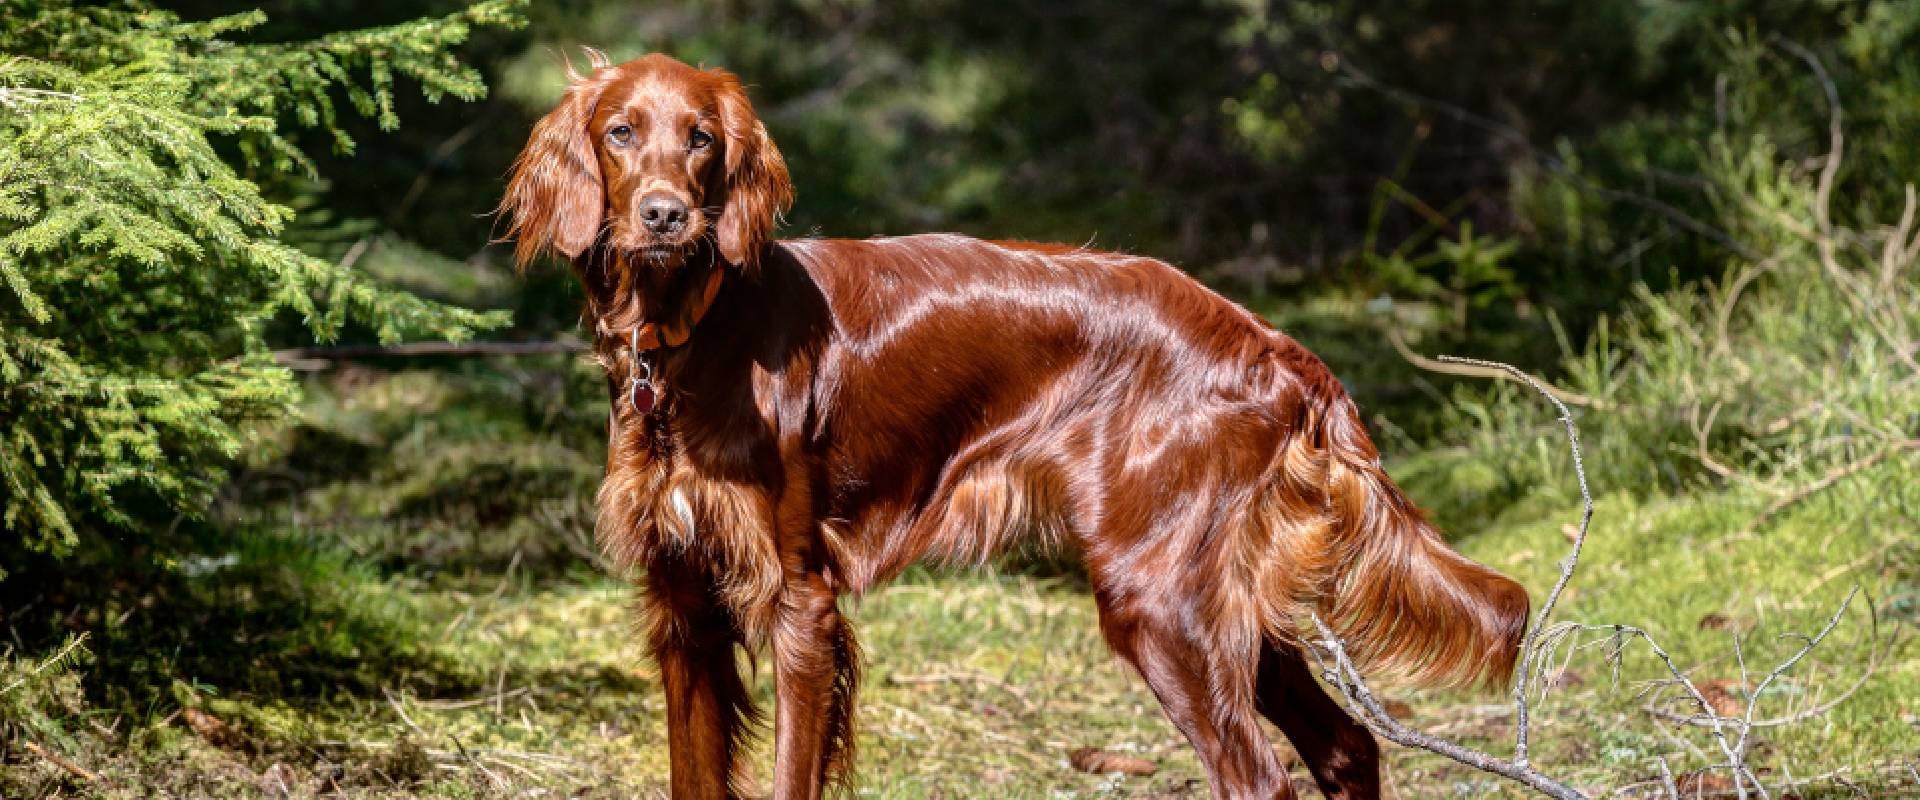 Irish Doodle parent, Red Setter standing in forest